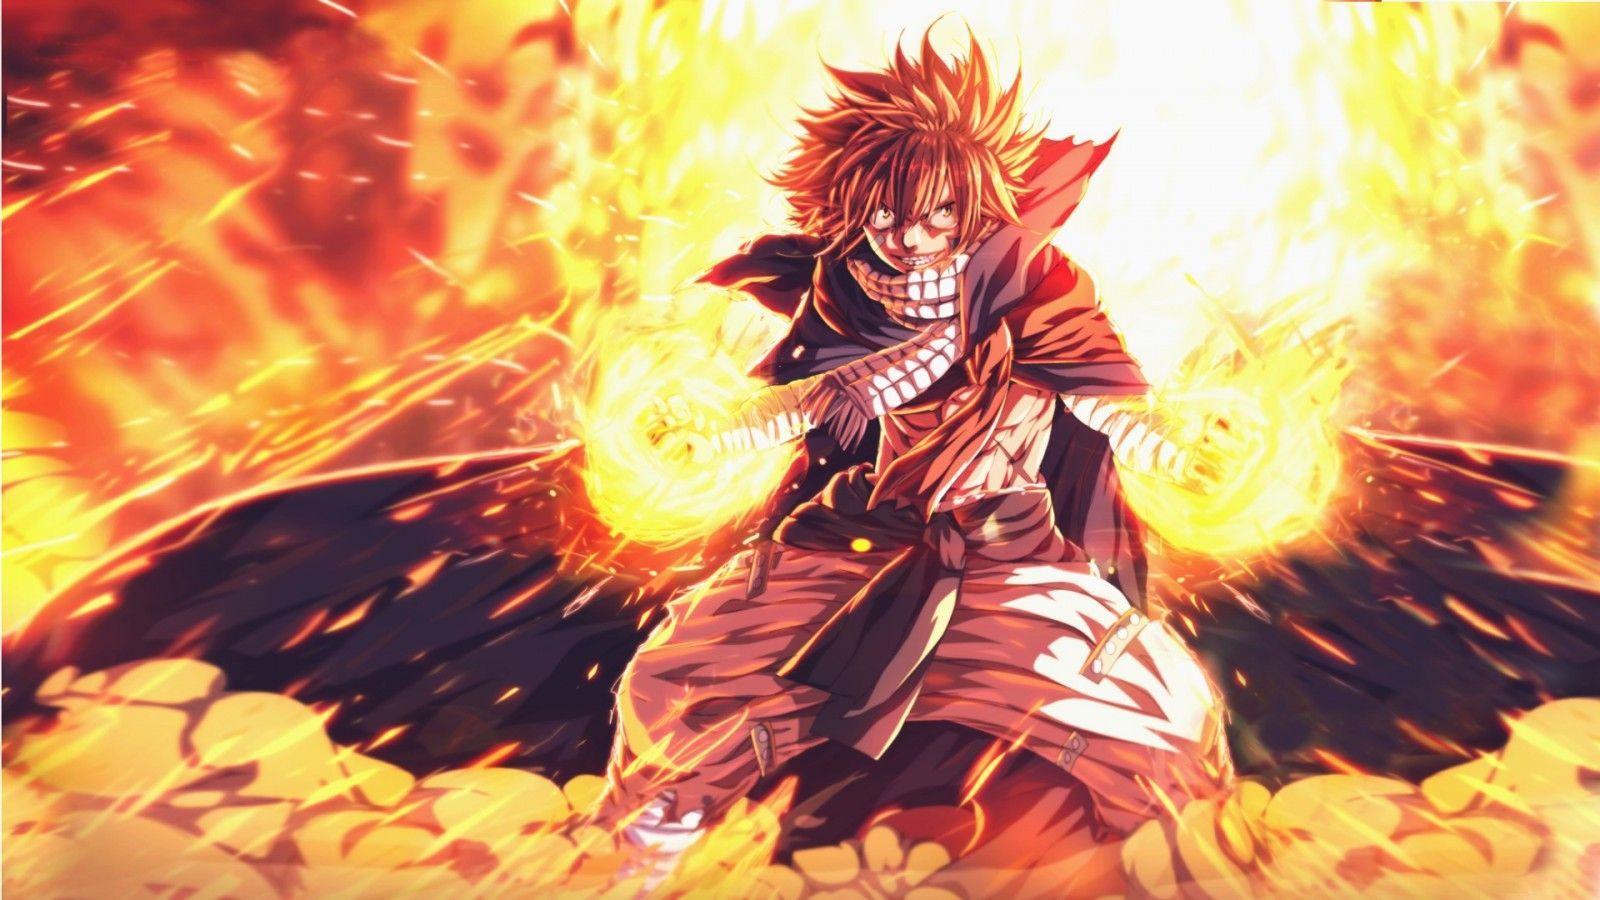 Best Fairy Tail Wallpaper (Picture)